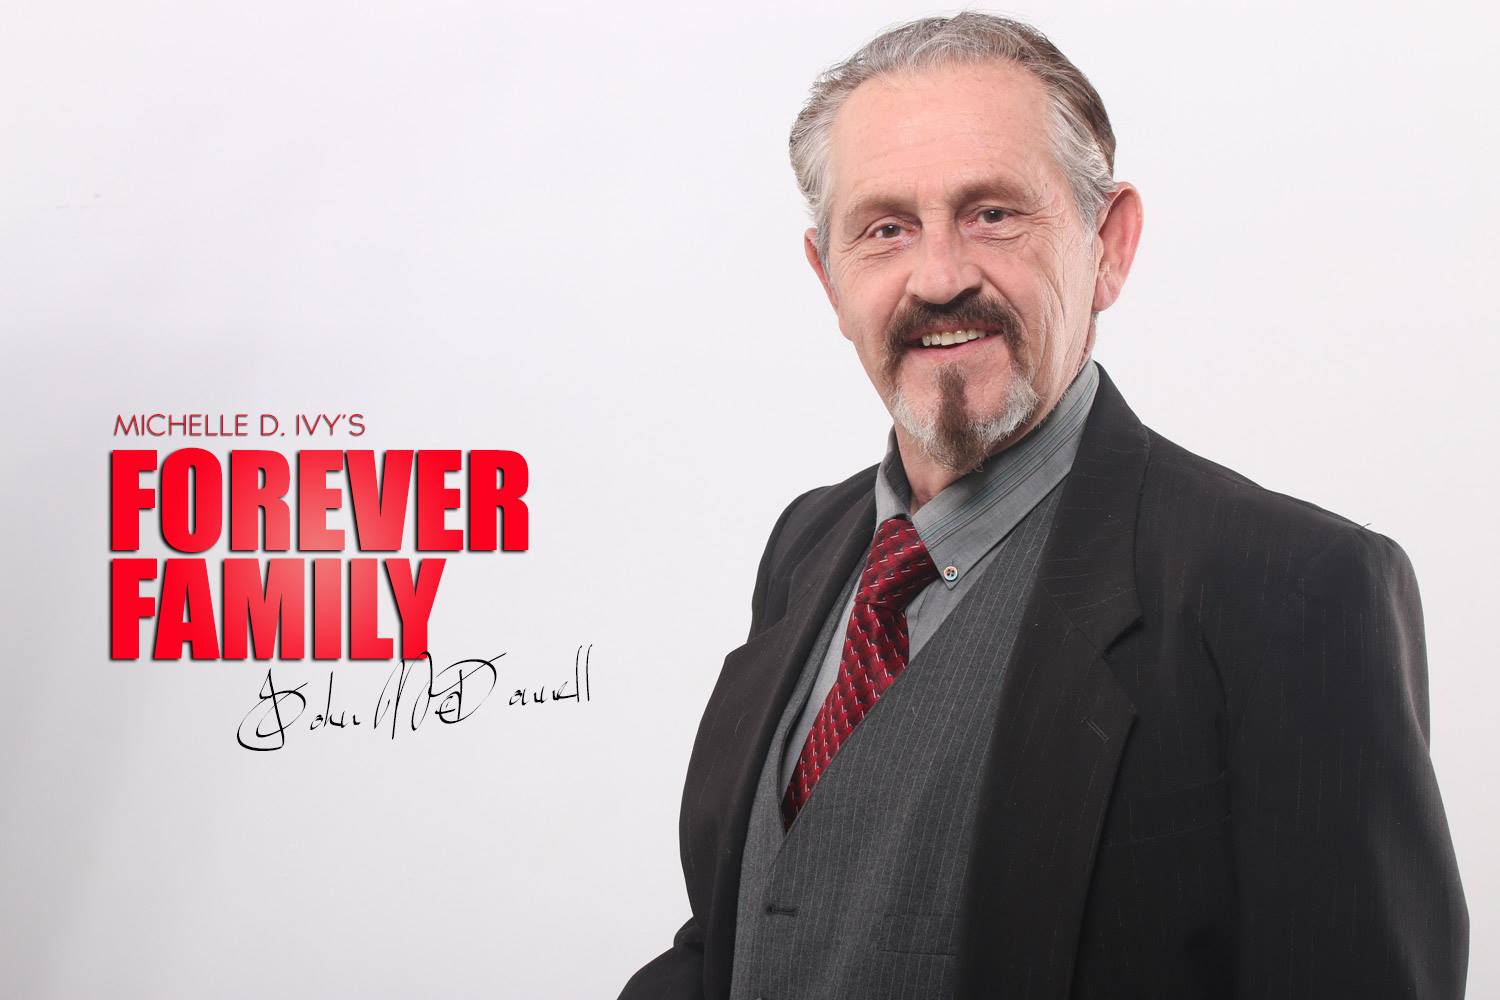 Andres in 'Forever Family', produced by Michelle D Ivy Films.